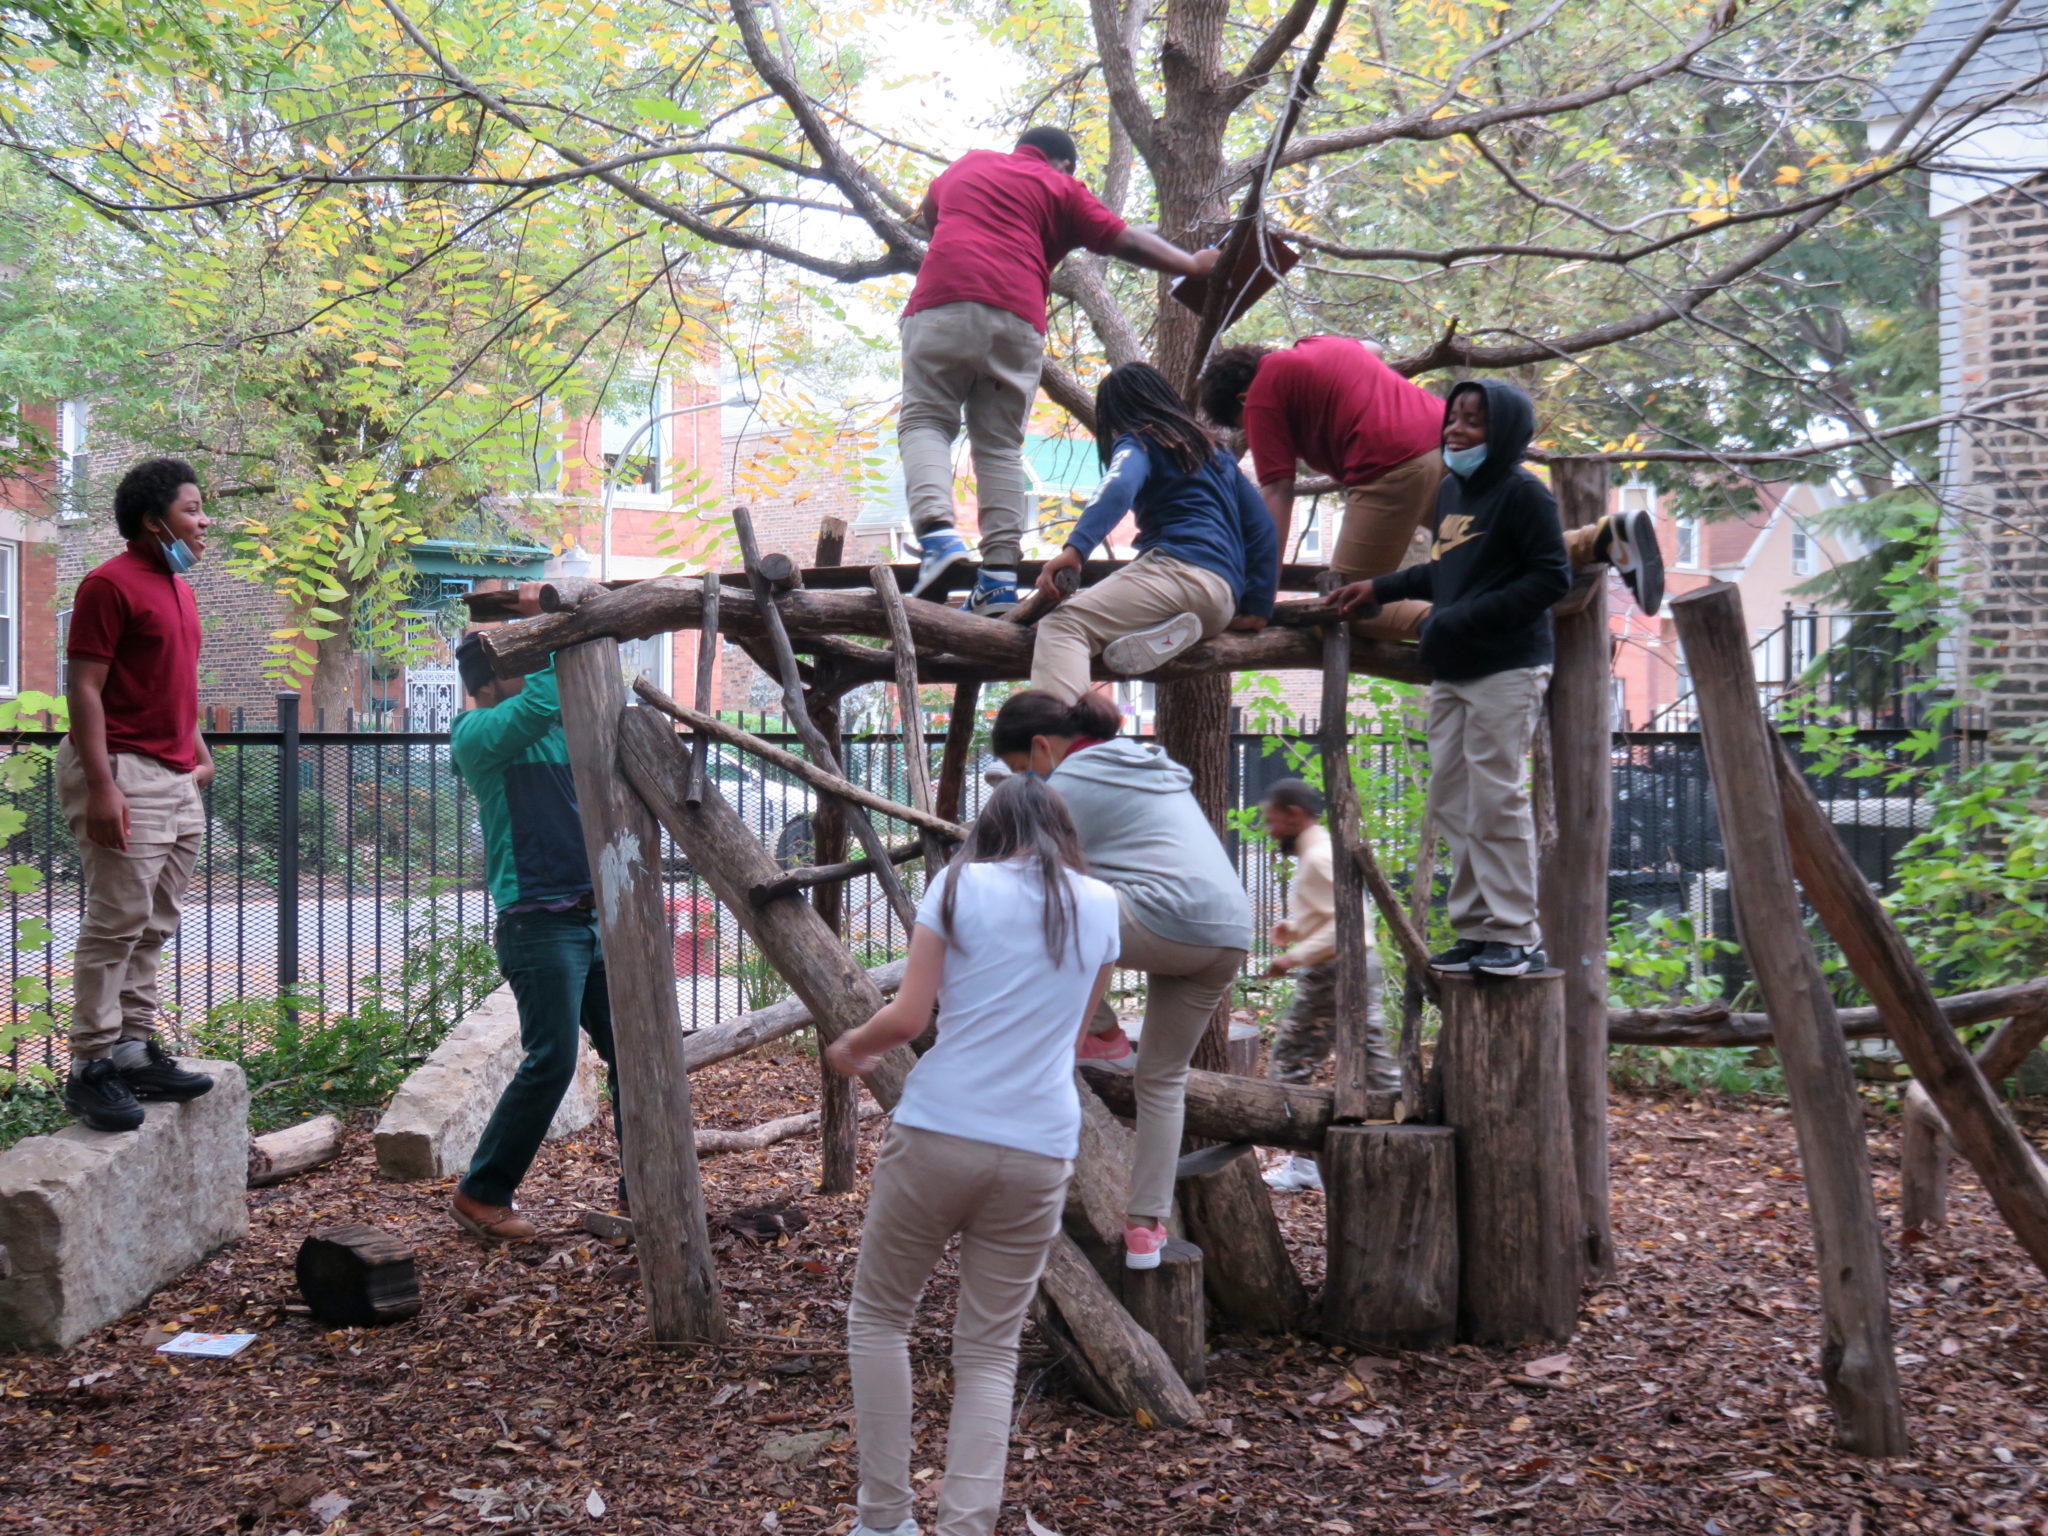 Group of students playing on a hand-made playground